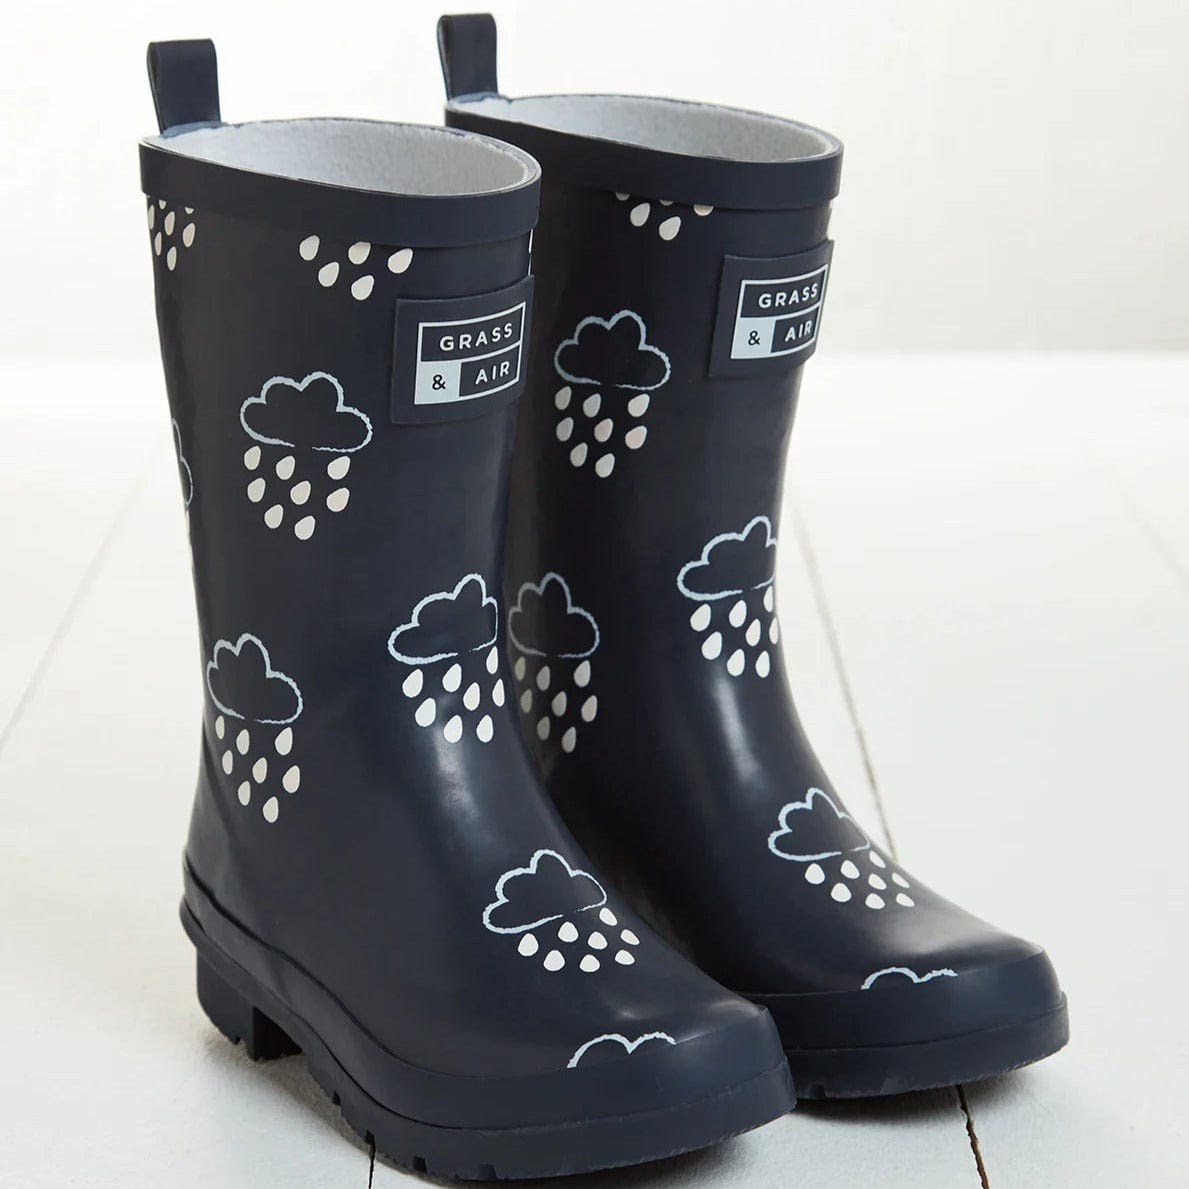 Grass & Air Wellie Boots Older Kids Navy Colour Changing Wellies